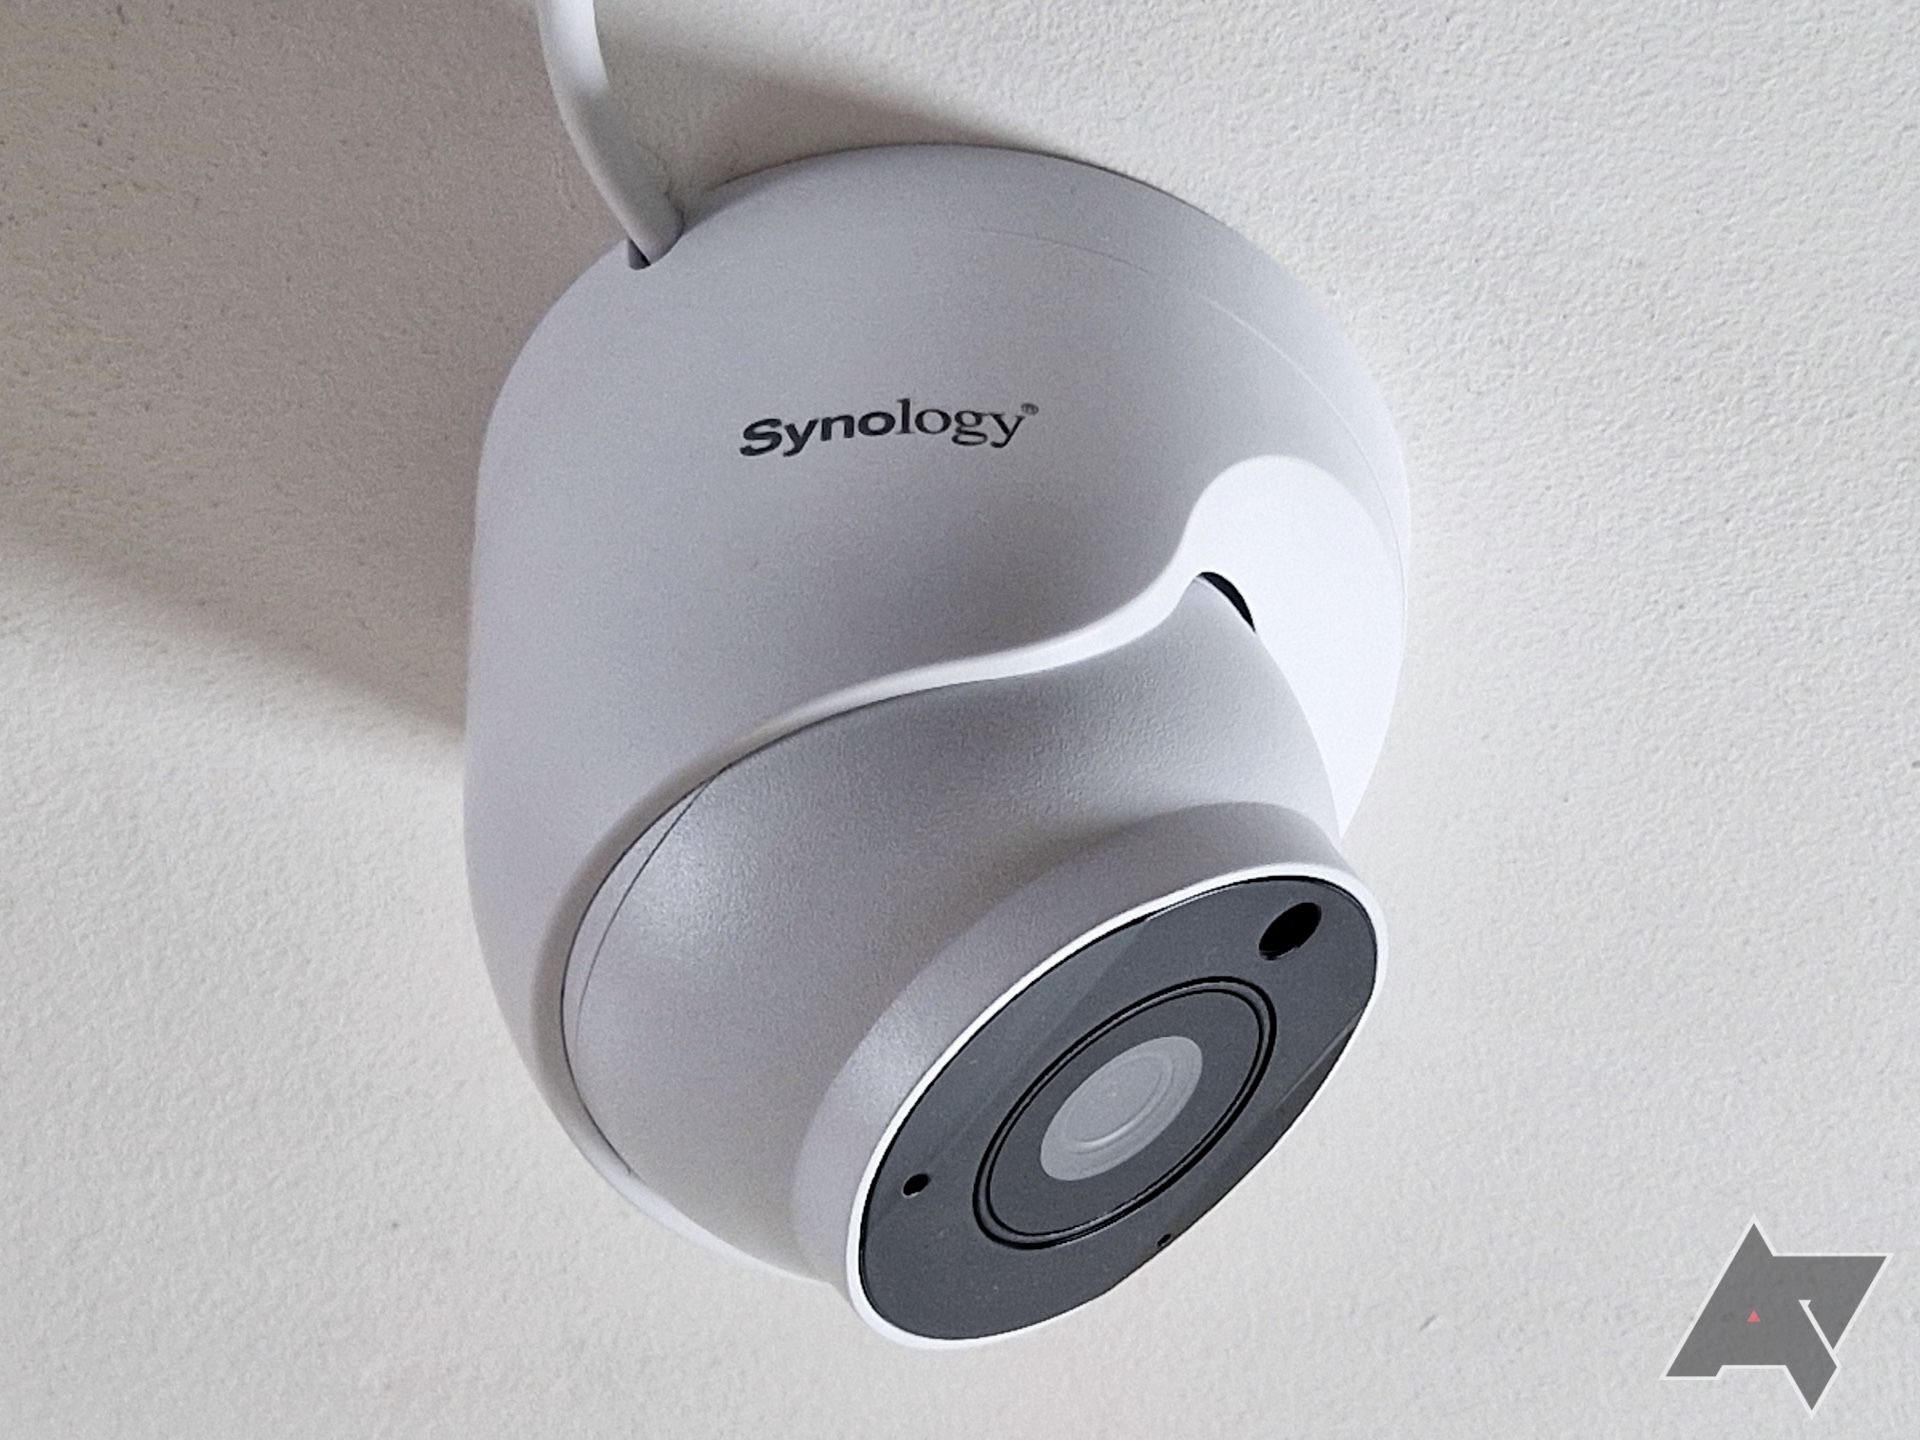 Synology TC500 camera mounted on the ceiling